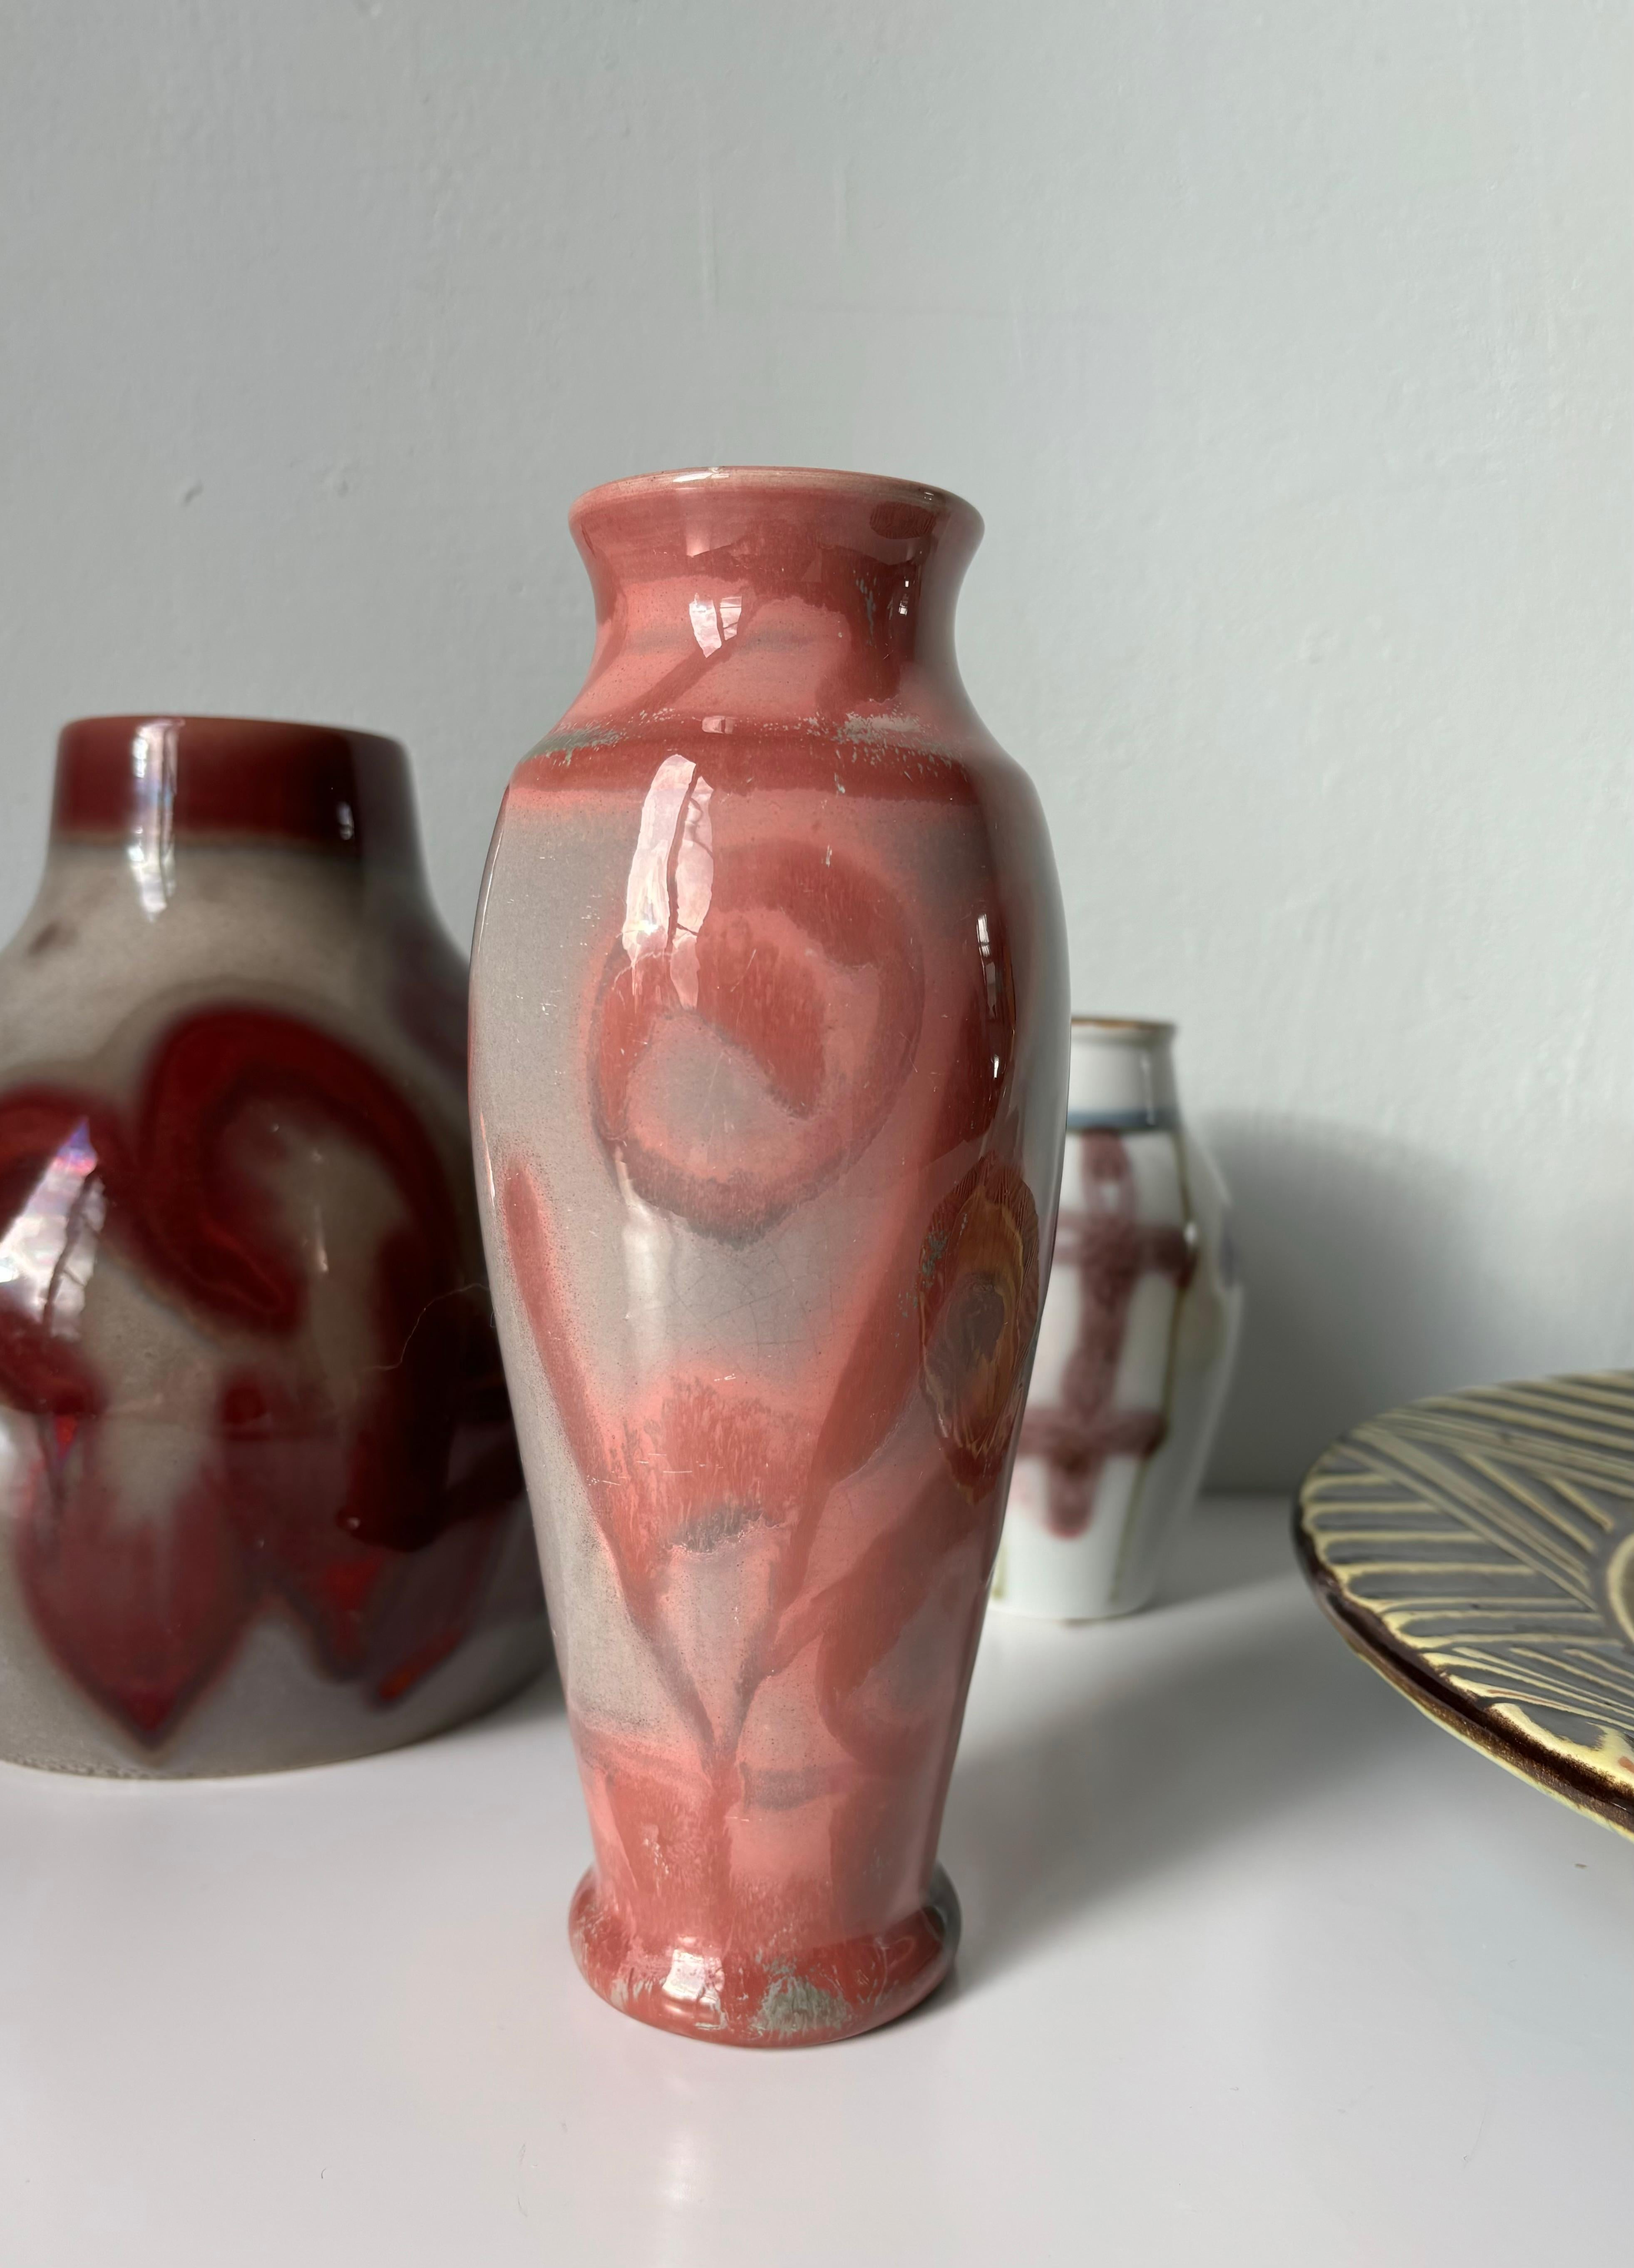 100-year old Swedish Art Nouveau vase handmade by artist Edgar Böckman in the 1920s. Warm grey, rose, magenta colored lustre glaze covering the slender shape with large organic decorations. Signed under base. Beautiful antique piece in great vintage